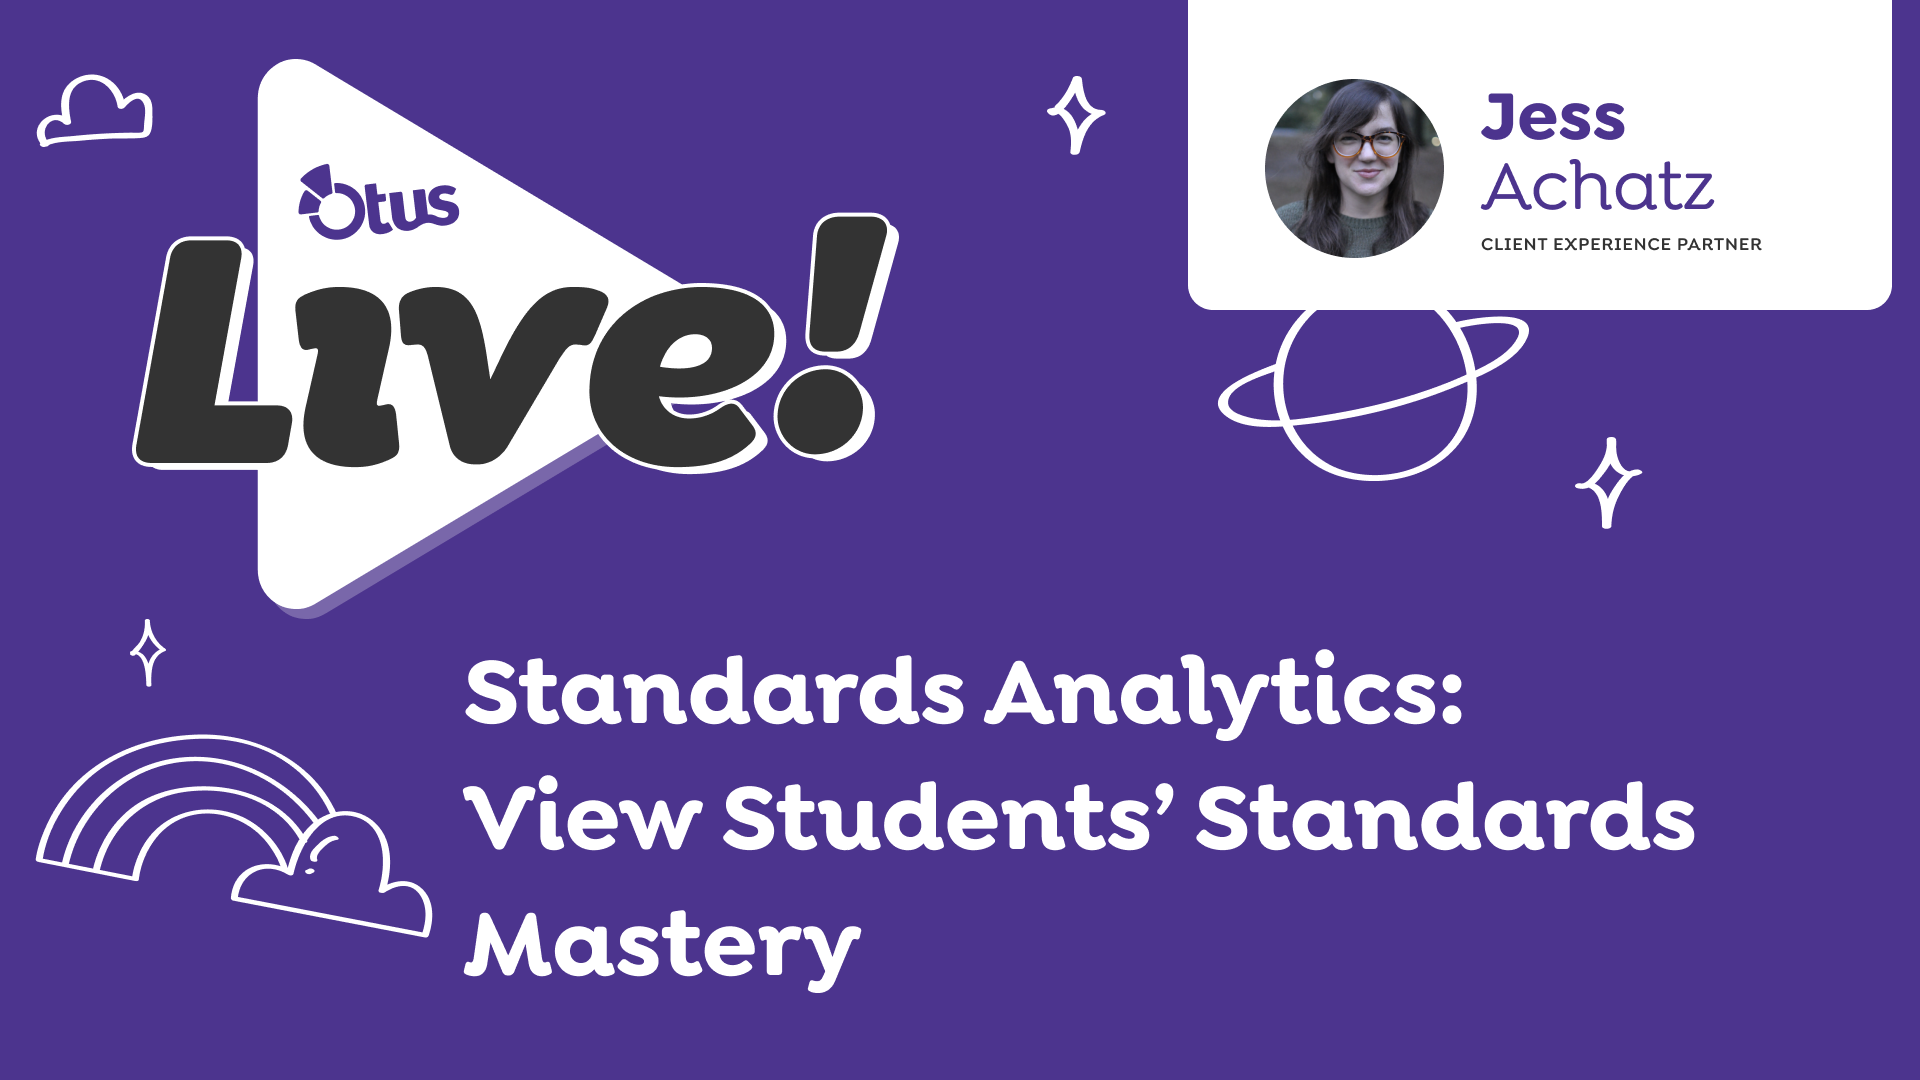 Standards Analytics: View Students’ Standards Mastery